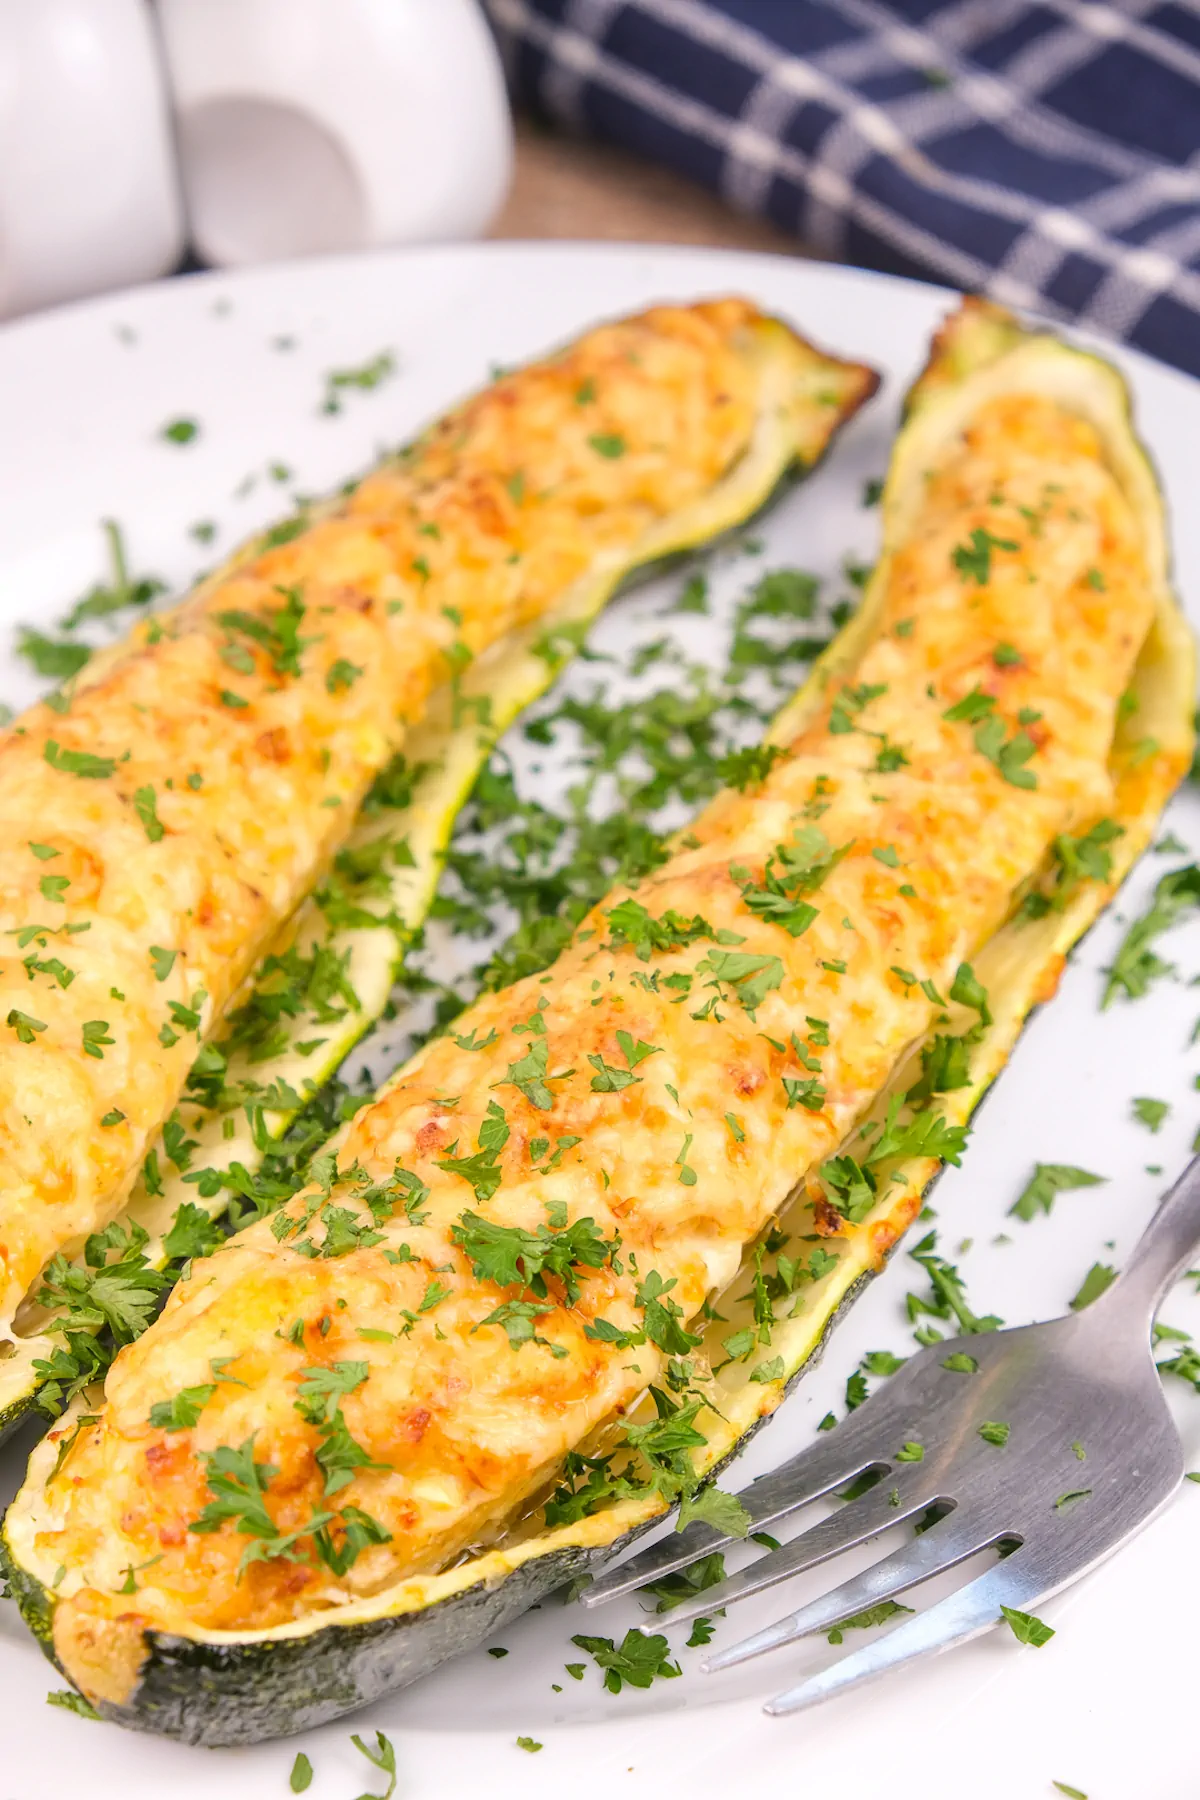 Keto zucchini boats filled with chicken and pesto and garnished with fresh herbs on a plate.